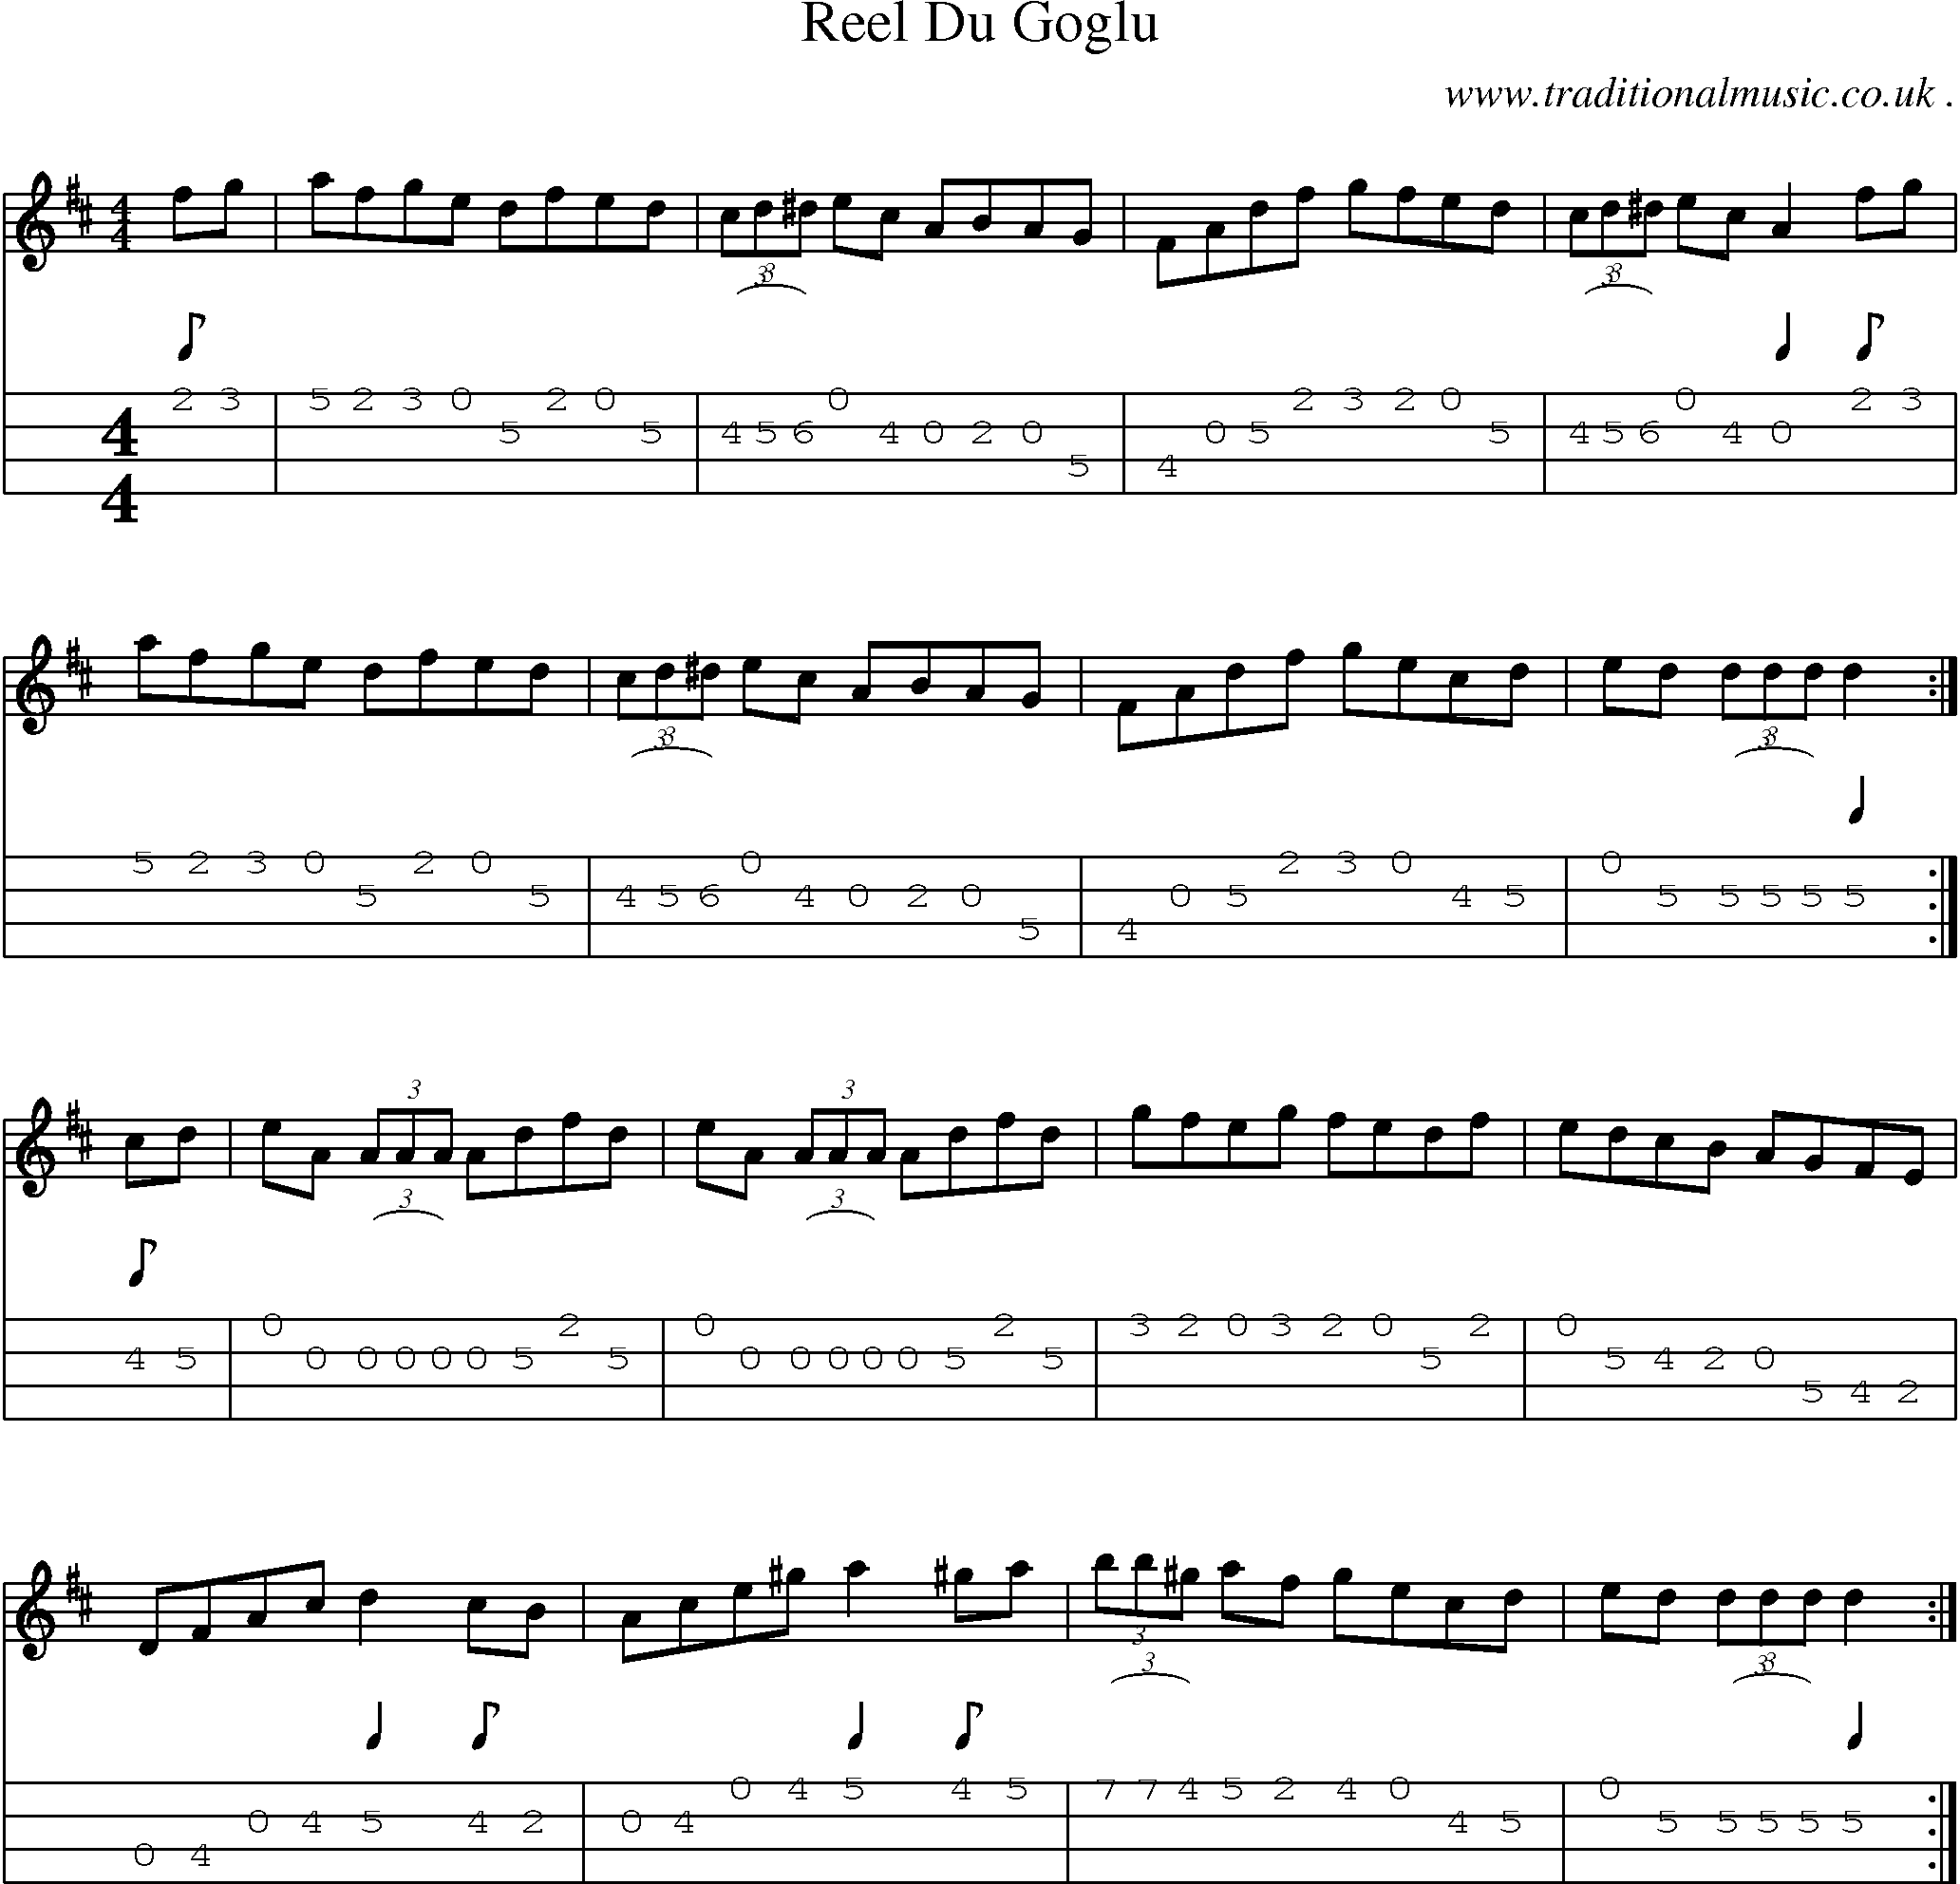 Music Score and Guitar Tabs for Reel Du Goglu